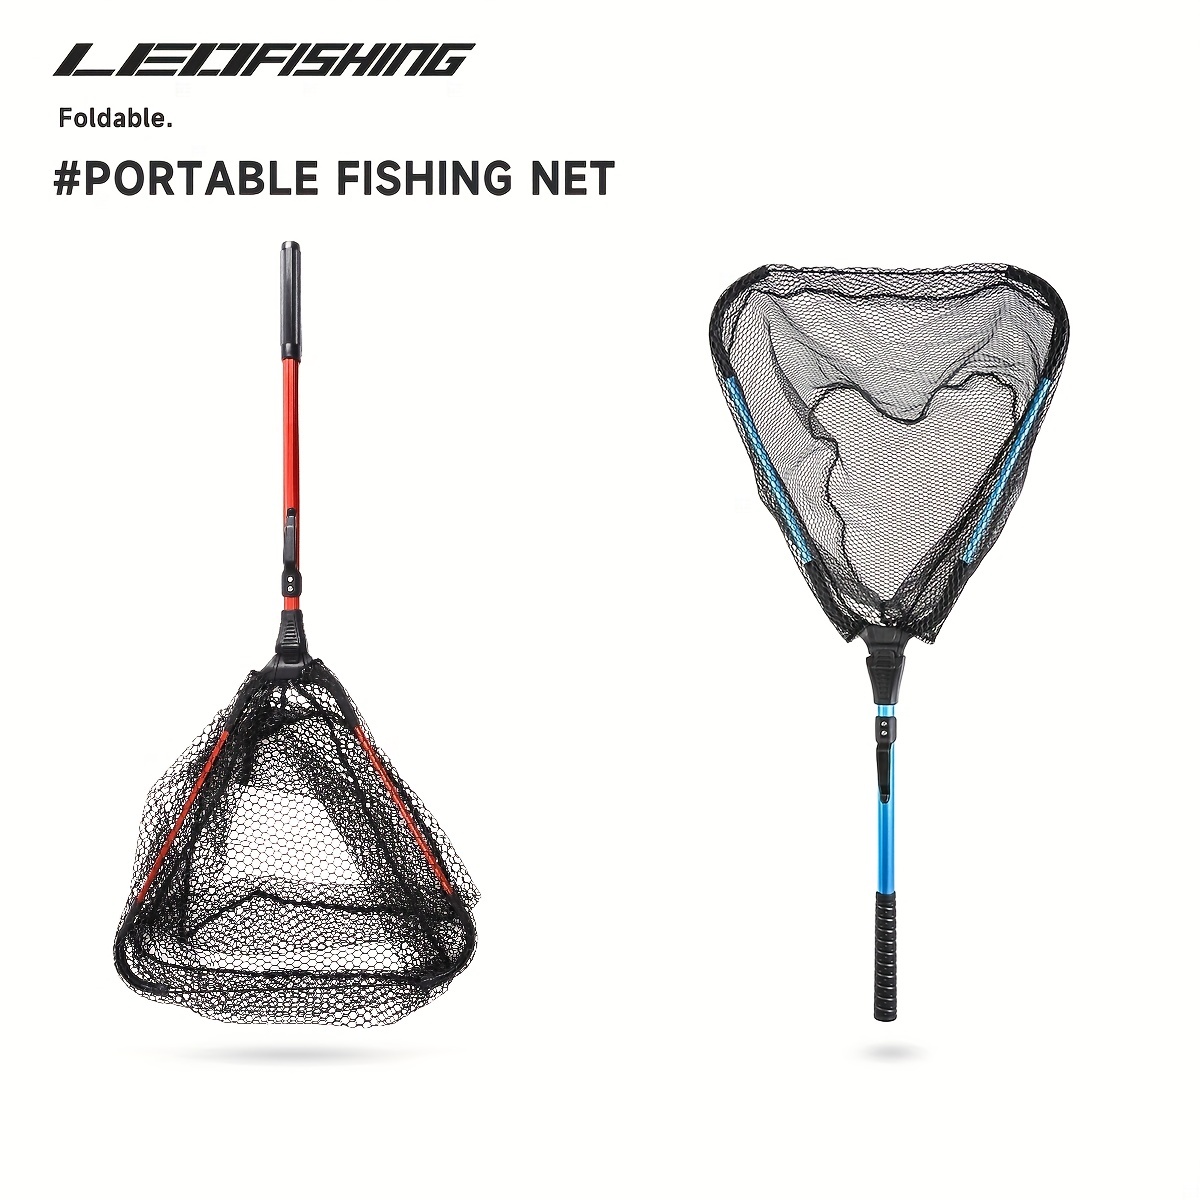 * Floating Fishing Net With Fixed/Telescopic Pole, Portable Lightweight  Orange Fishing Net For Freshwater, With Built In Length Scale